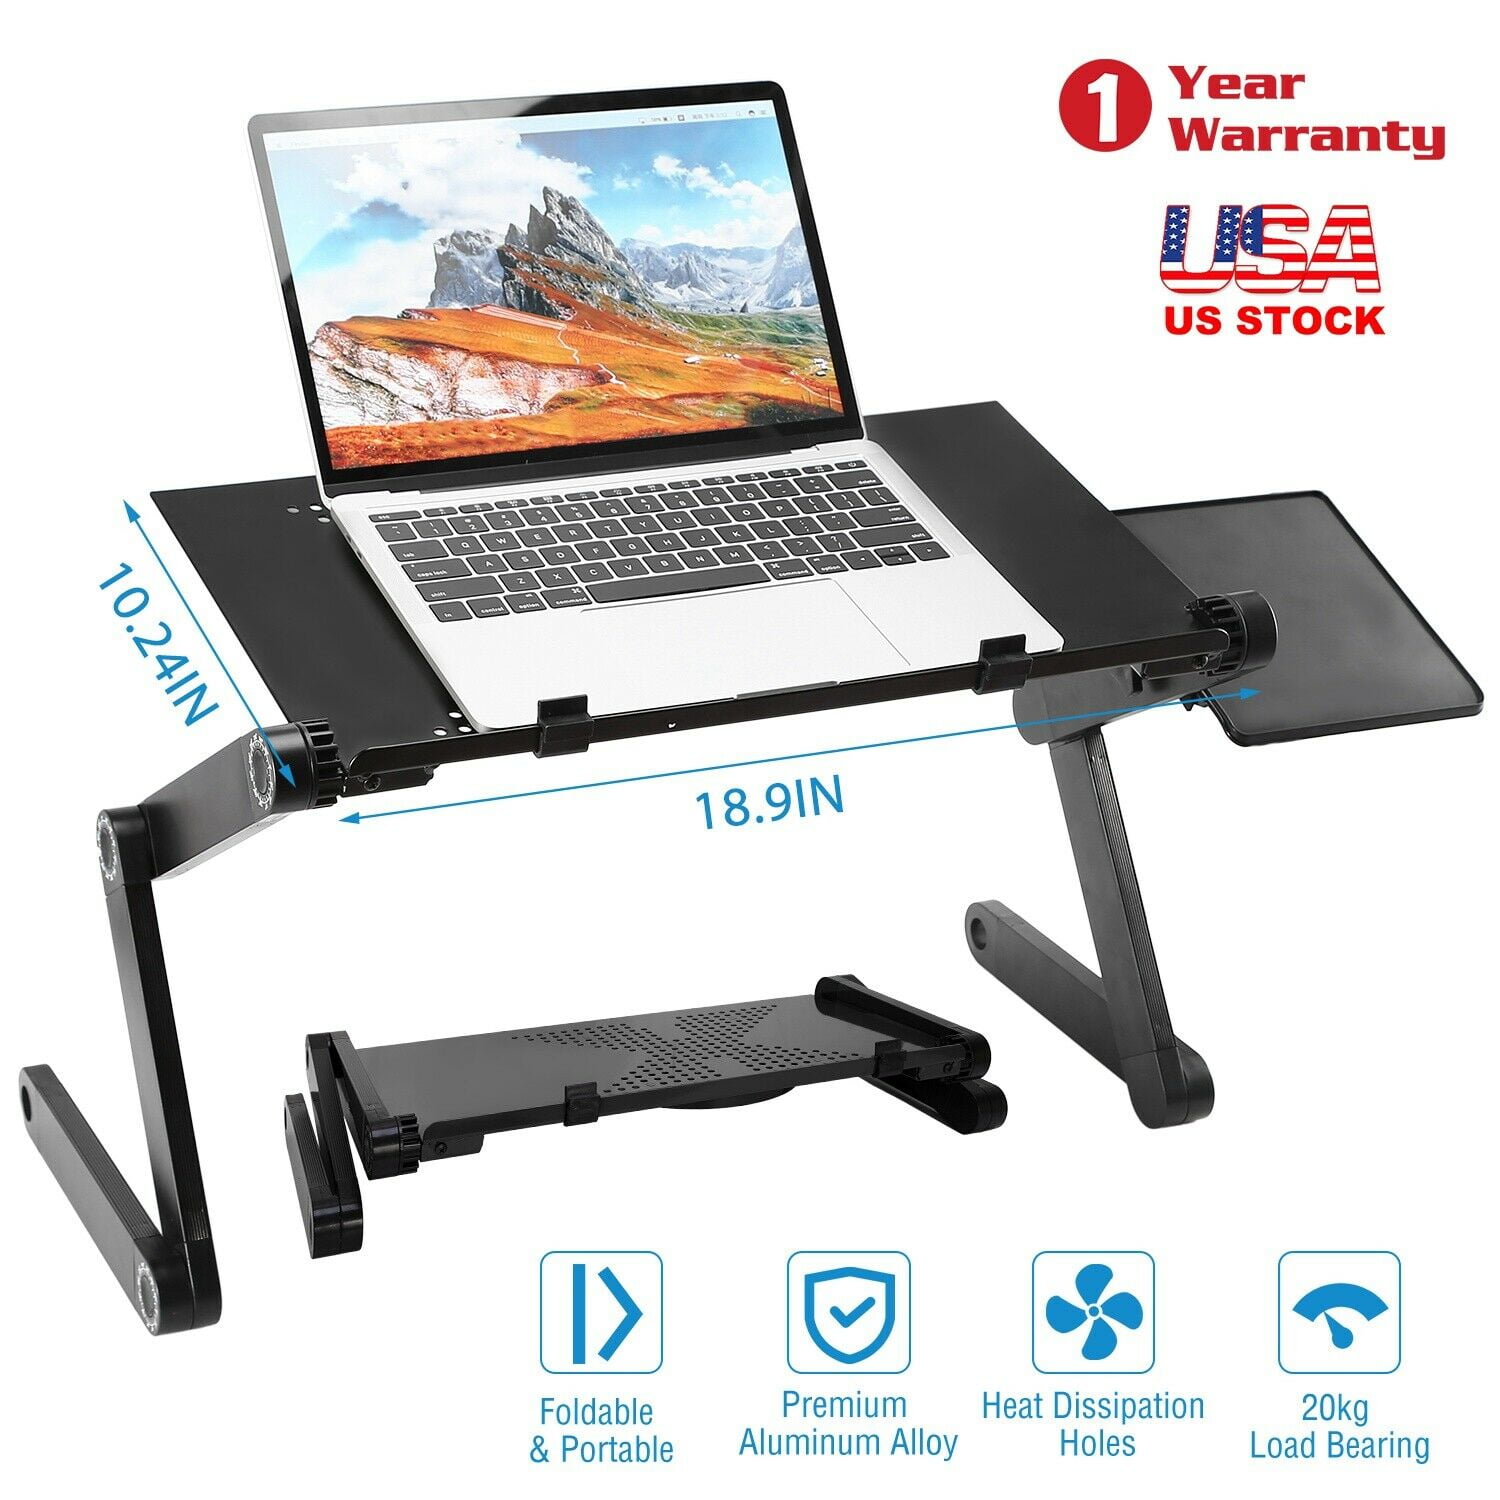 Black 18.9 x 10.24” Laptop Stand Height Adjustable Laptop Stands for Bed and Sofa 2 Anti-Skid Buckles Portable Laptop Tray with Mouse Panel 